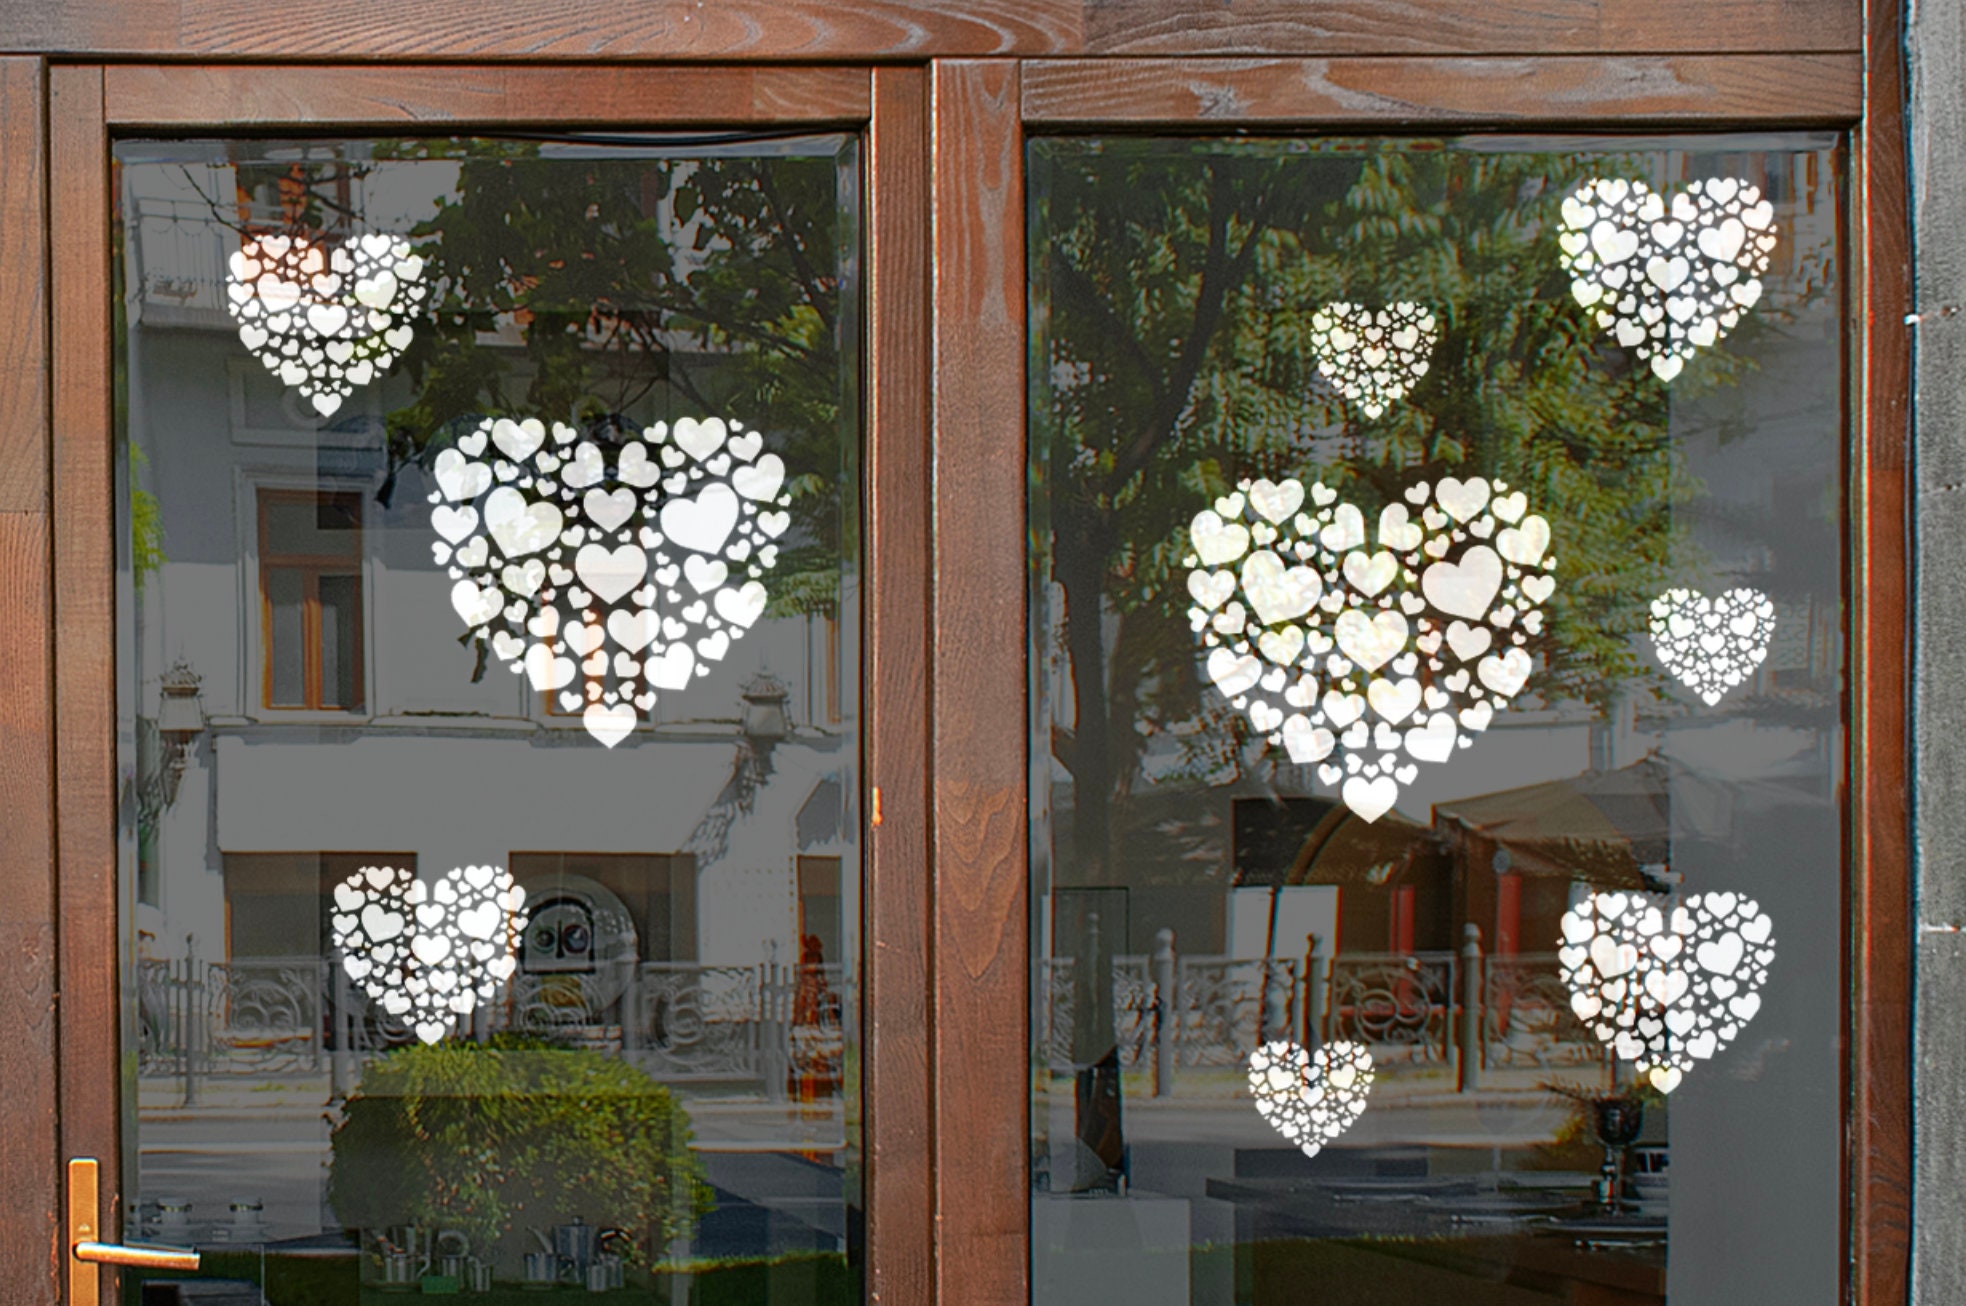 Heart of Hearts Valentines, Wedding, Bridal Window Cling Window Flakes